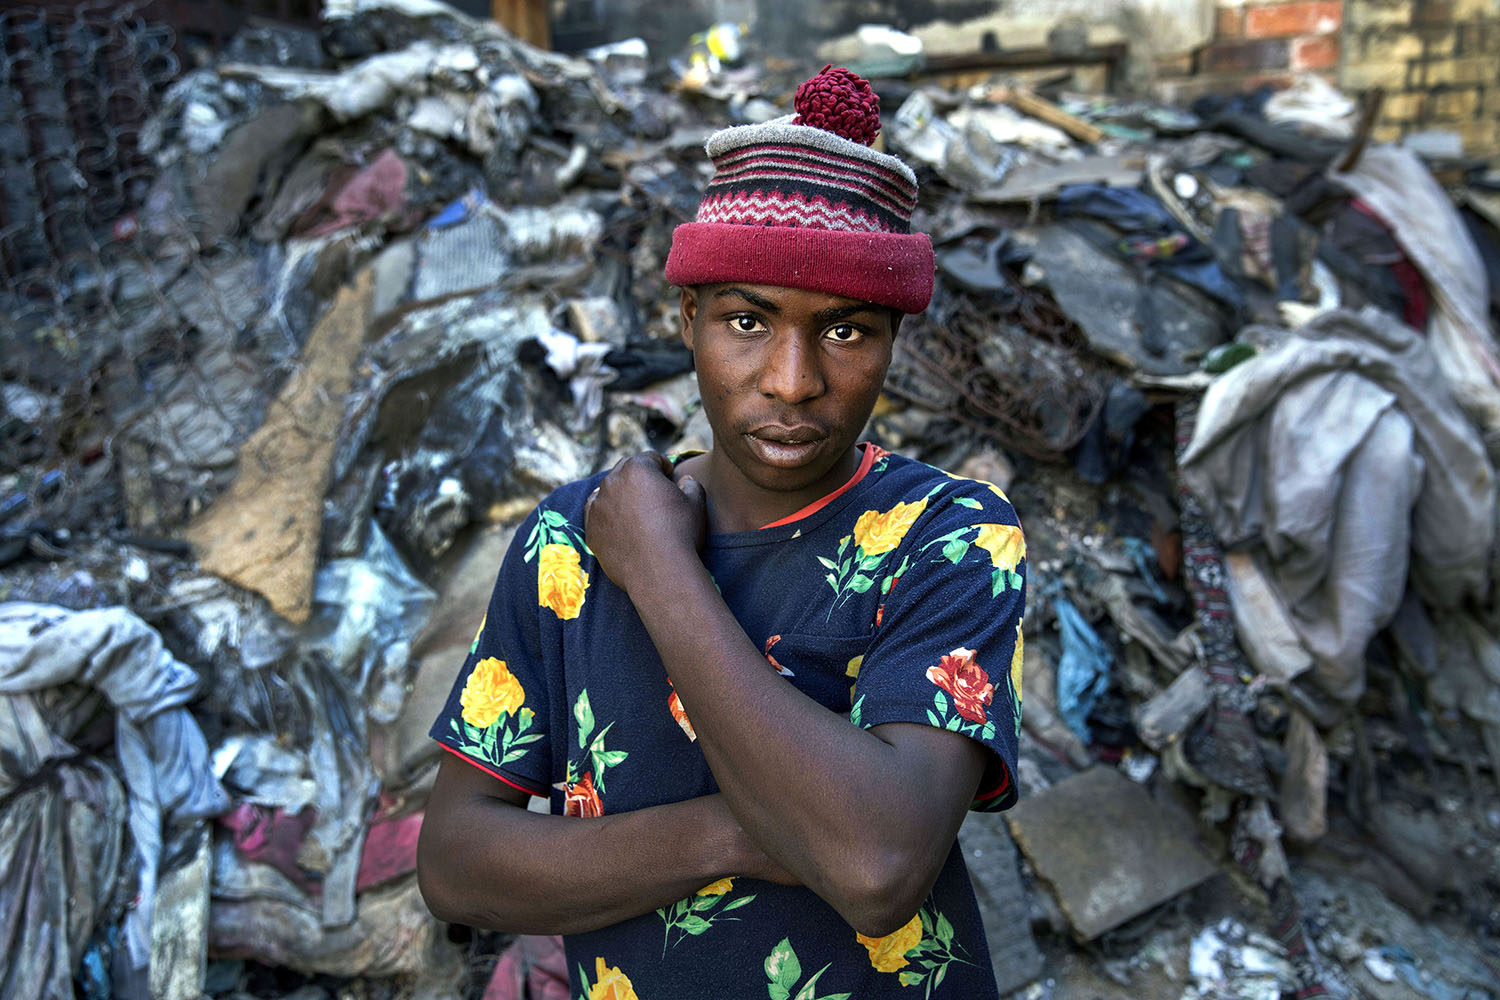 Pumulelo (age 25 ) a migrant from Zimbabwe stands in the piles of rubbish at a derelict building he has made his home, July 19, 2015.